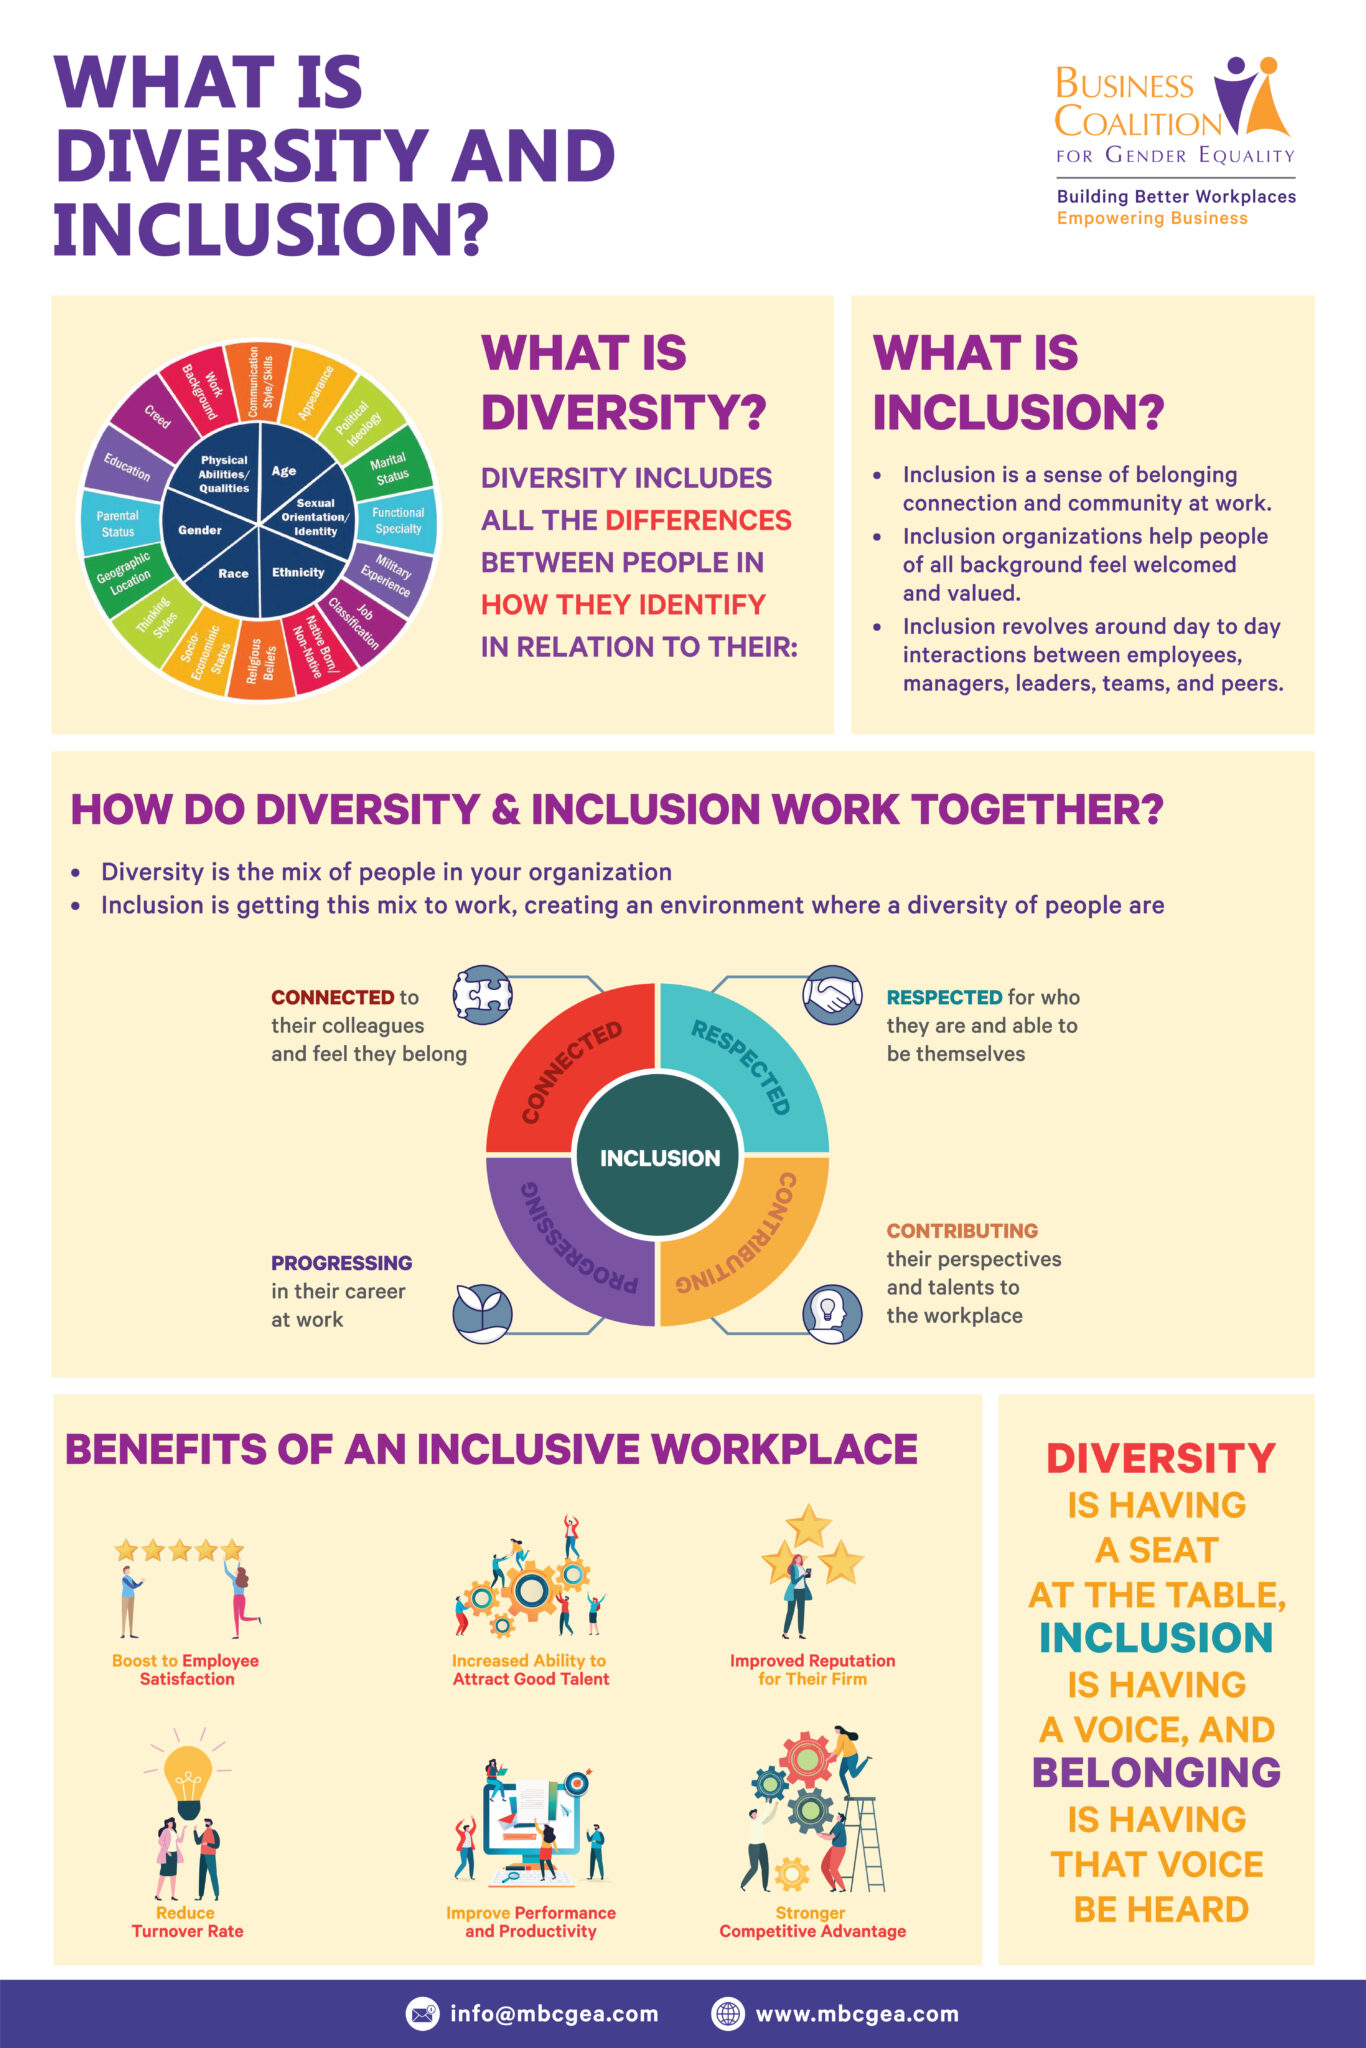 What Is Diversity And Inclusion Bcge Business Coalition For Gender